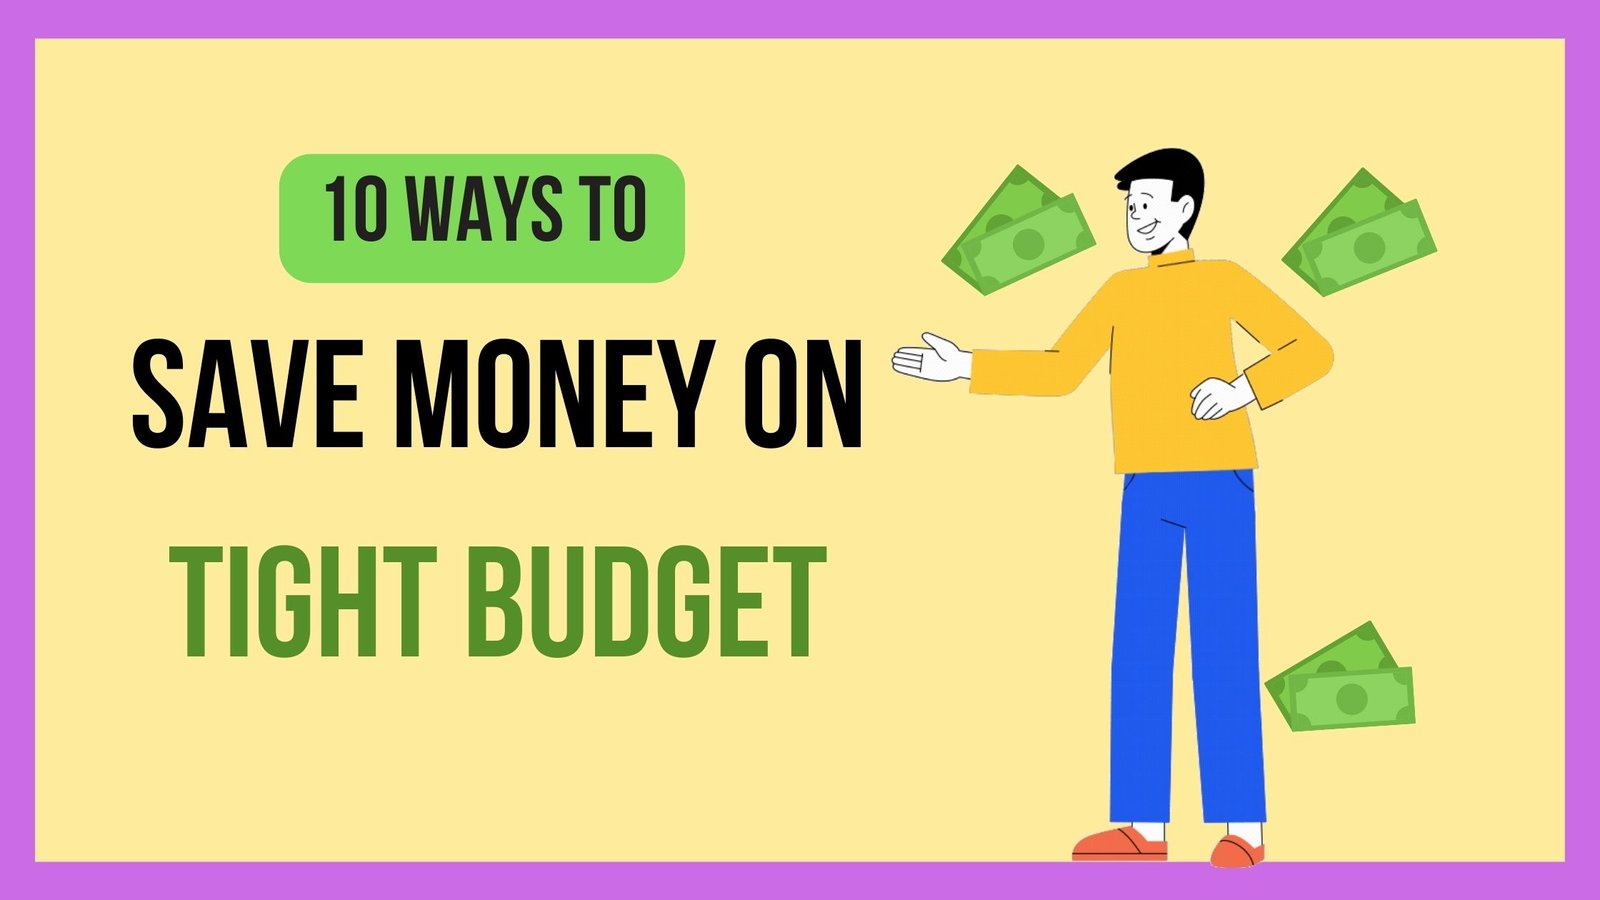 10 Ways to Save Money On a Tight Budget